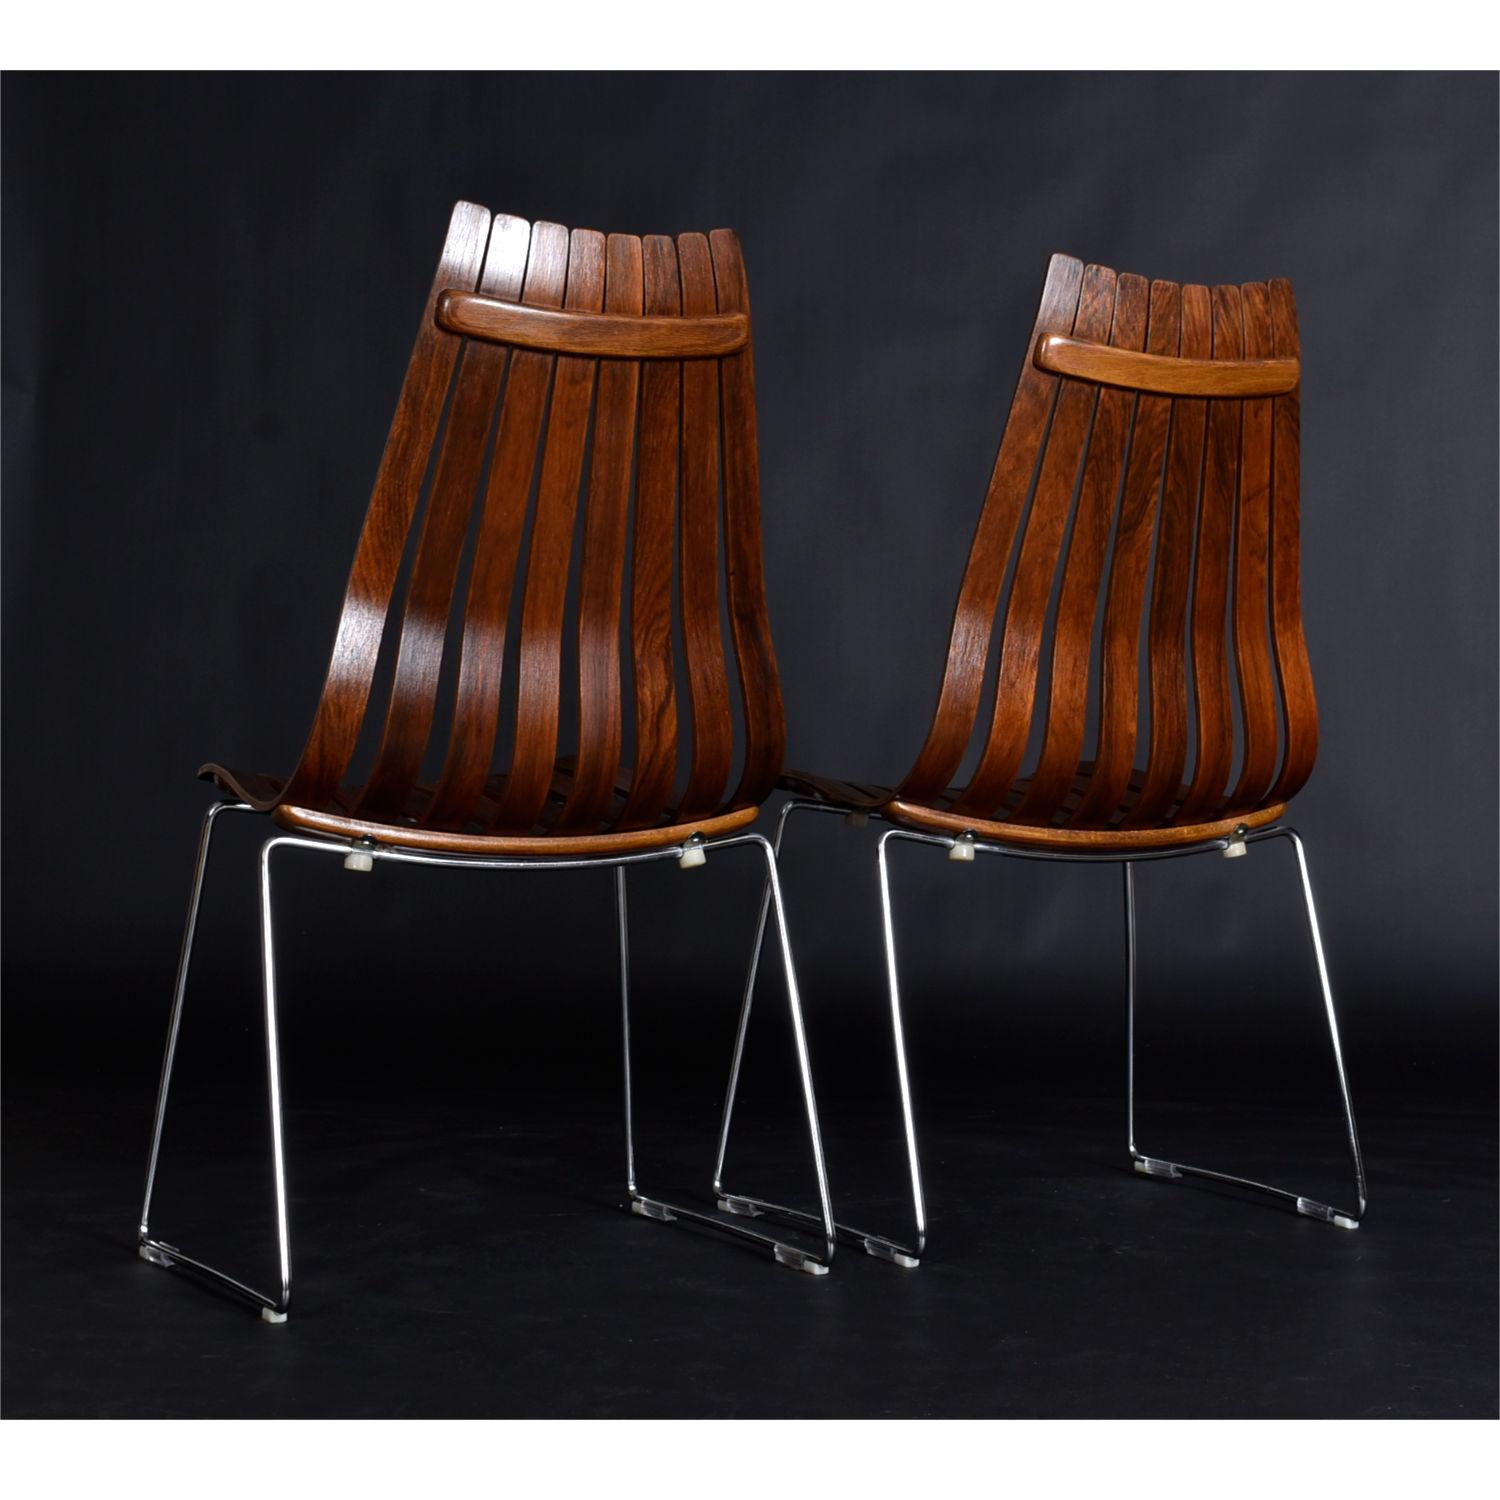 Scandinavian Modern Hans Brattrud Rosewood Scandia Dining Chairs by Hove Mobler of Norway